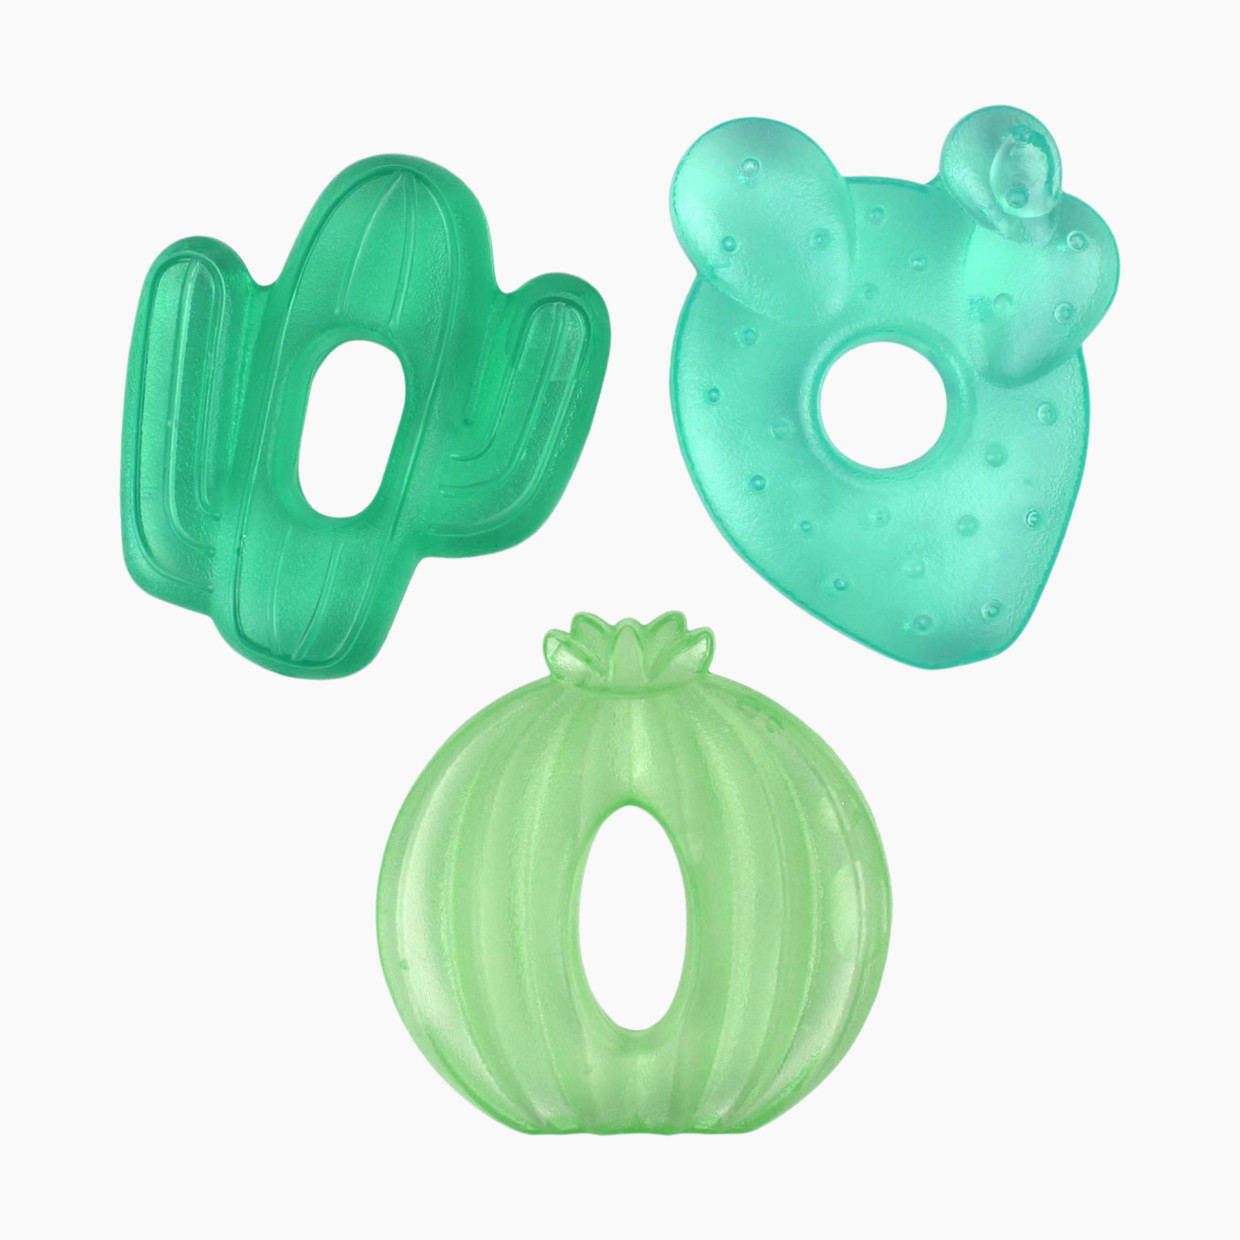 Itzy Ritzy Water-Filled Teether 3 pk - Cactus.